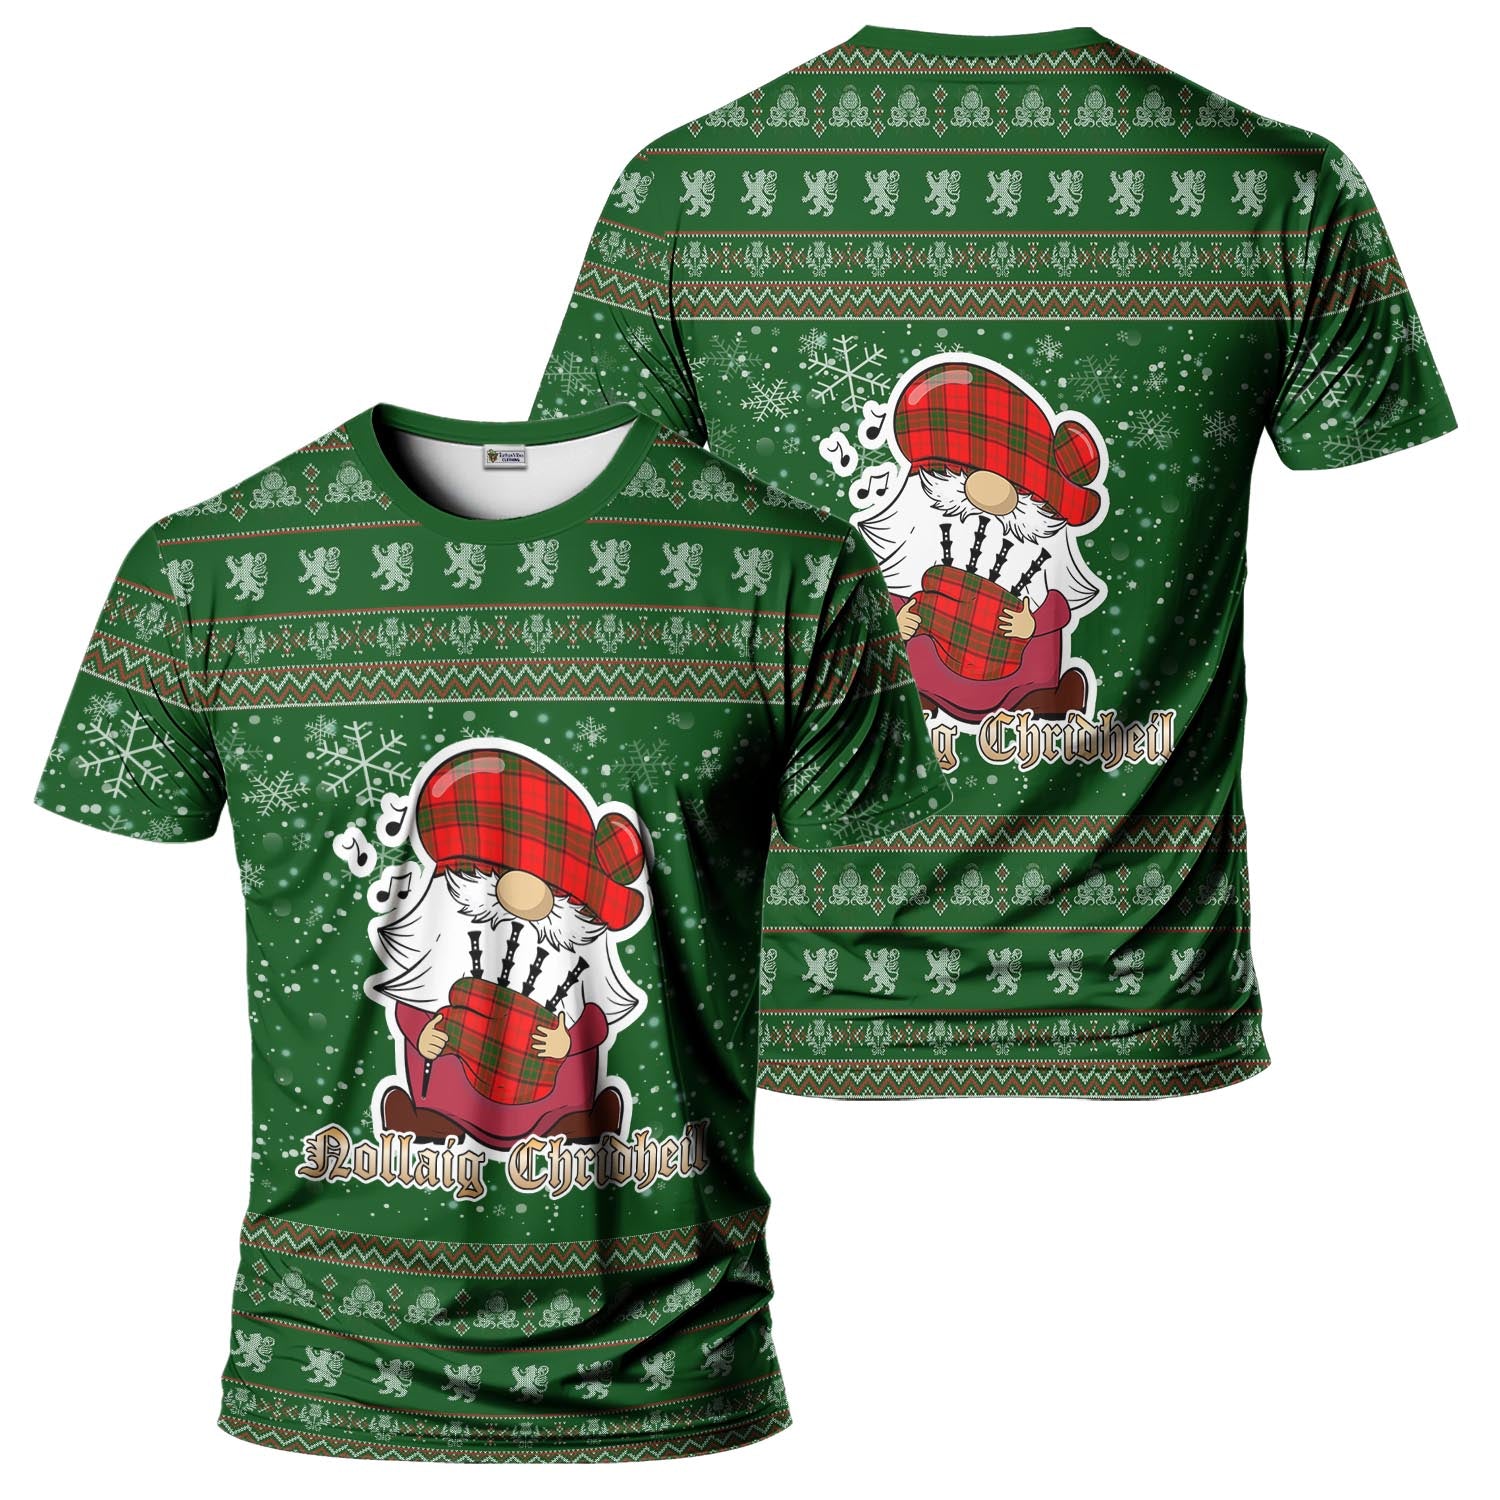 Maxtone Clan Christmas Family T-Shirt with Funny Gnome Playing Bagpipes Men's Shirt Green - Tartanvibesclothing